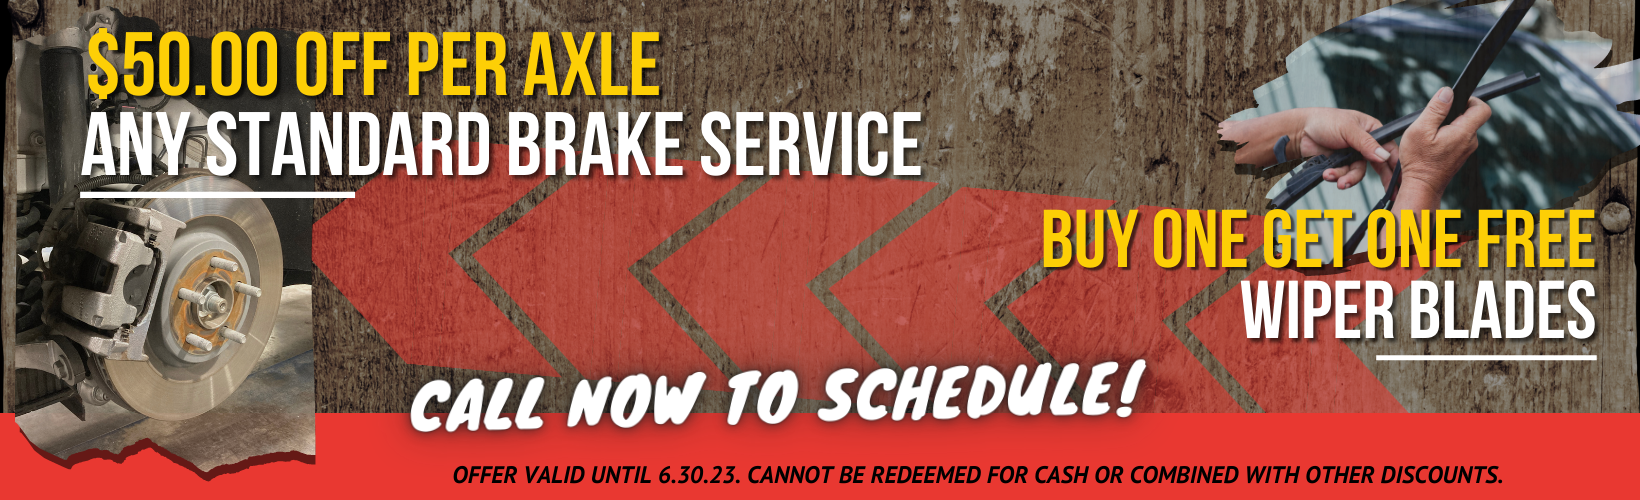 Brake Special (1024 × 768 px) (Facebook Cover) (11).png